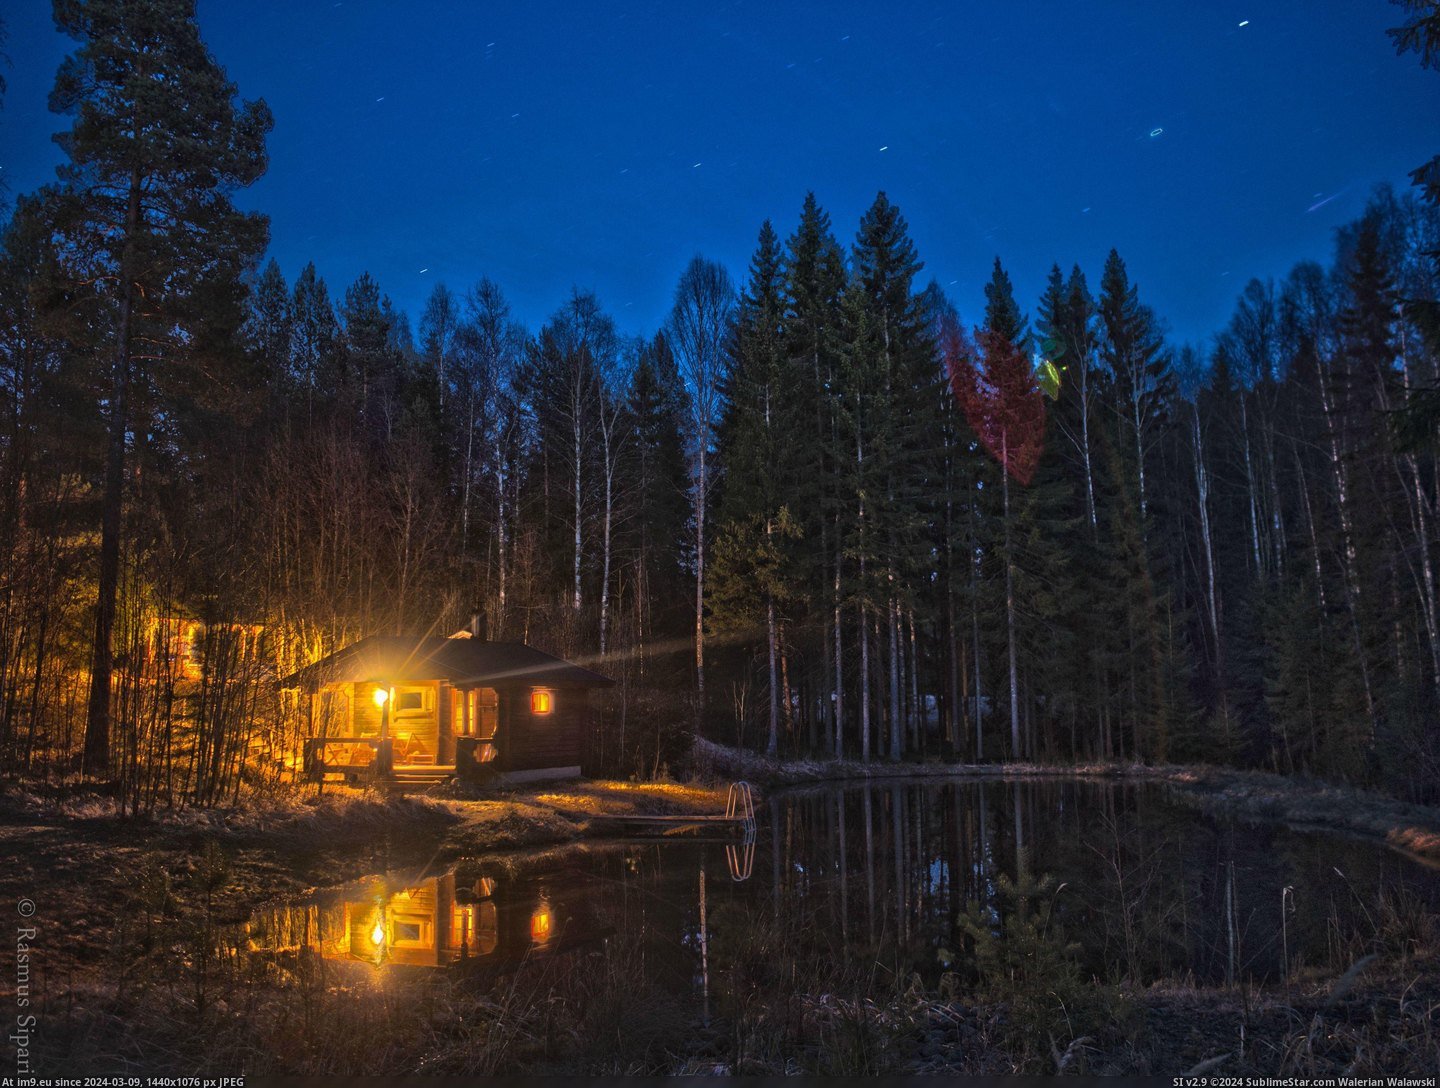 #Was #Nice #Easter #Cabin #Spent #Place [Pics] I spent easter on my GF's cabin, it was rather nice place Pic. (Image of album My r/PICS favs))